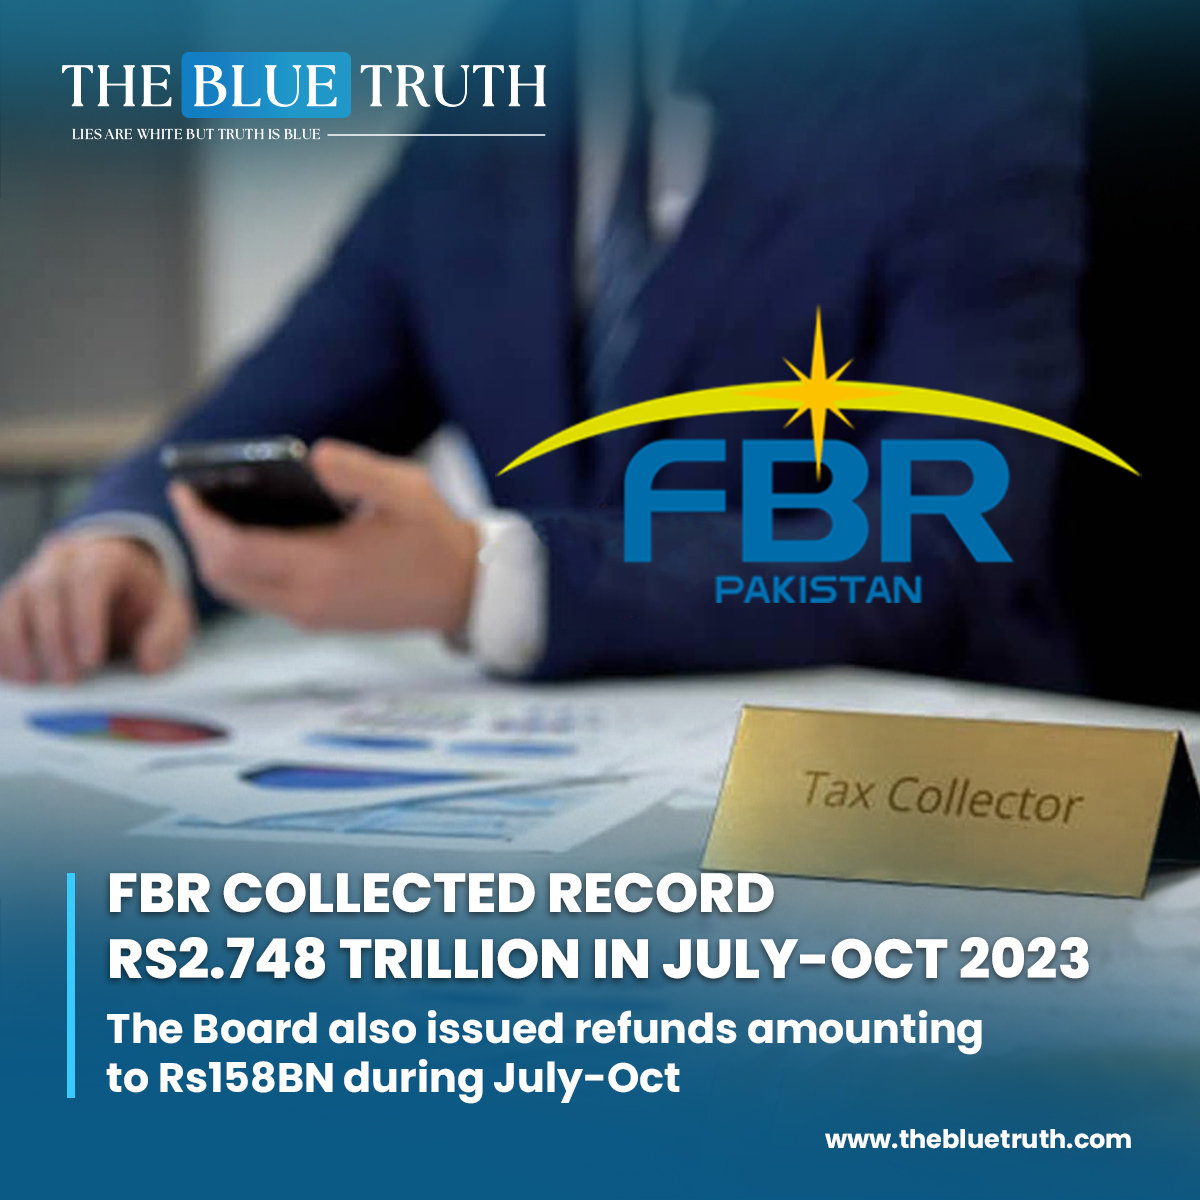 FBR collected record Rs2.748 trillion in July-Oct 2023.
The Board also issued refunds amounting to Rs158BN during July-Oct

#FBR #Revenuecollection #economictargets #economicgrowth #FinancialUpdates 
 #tbt #TheBlueTruth